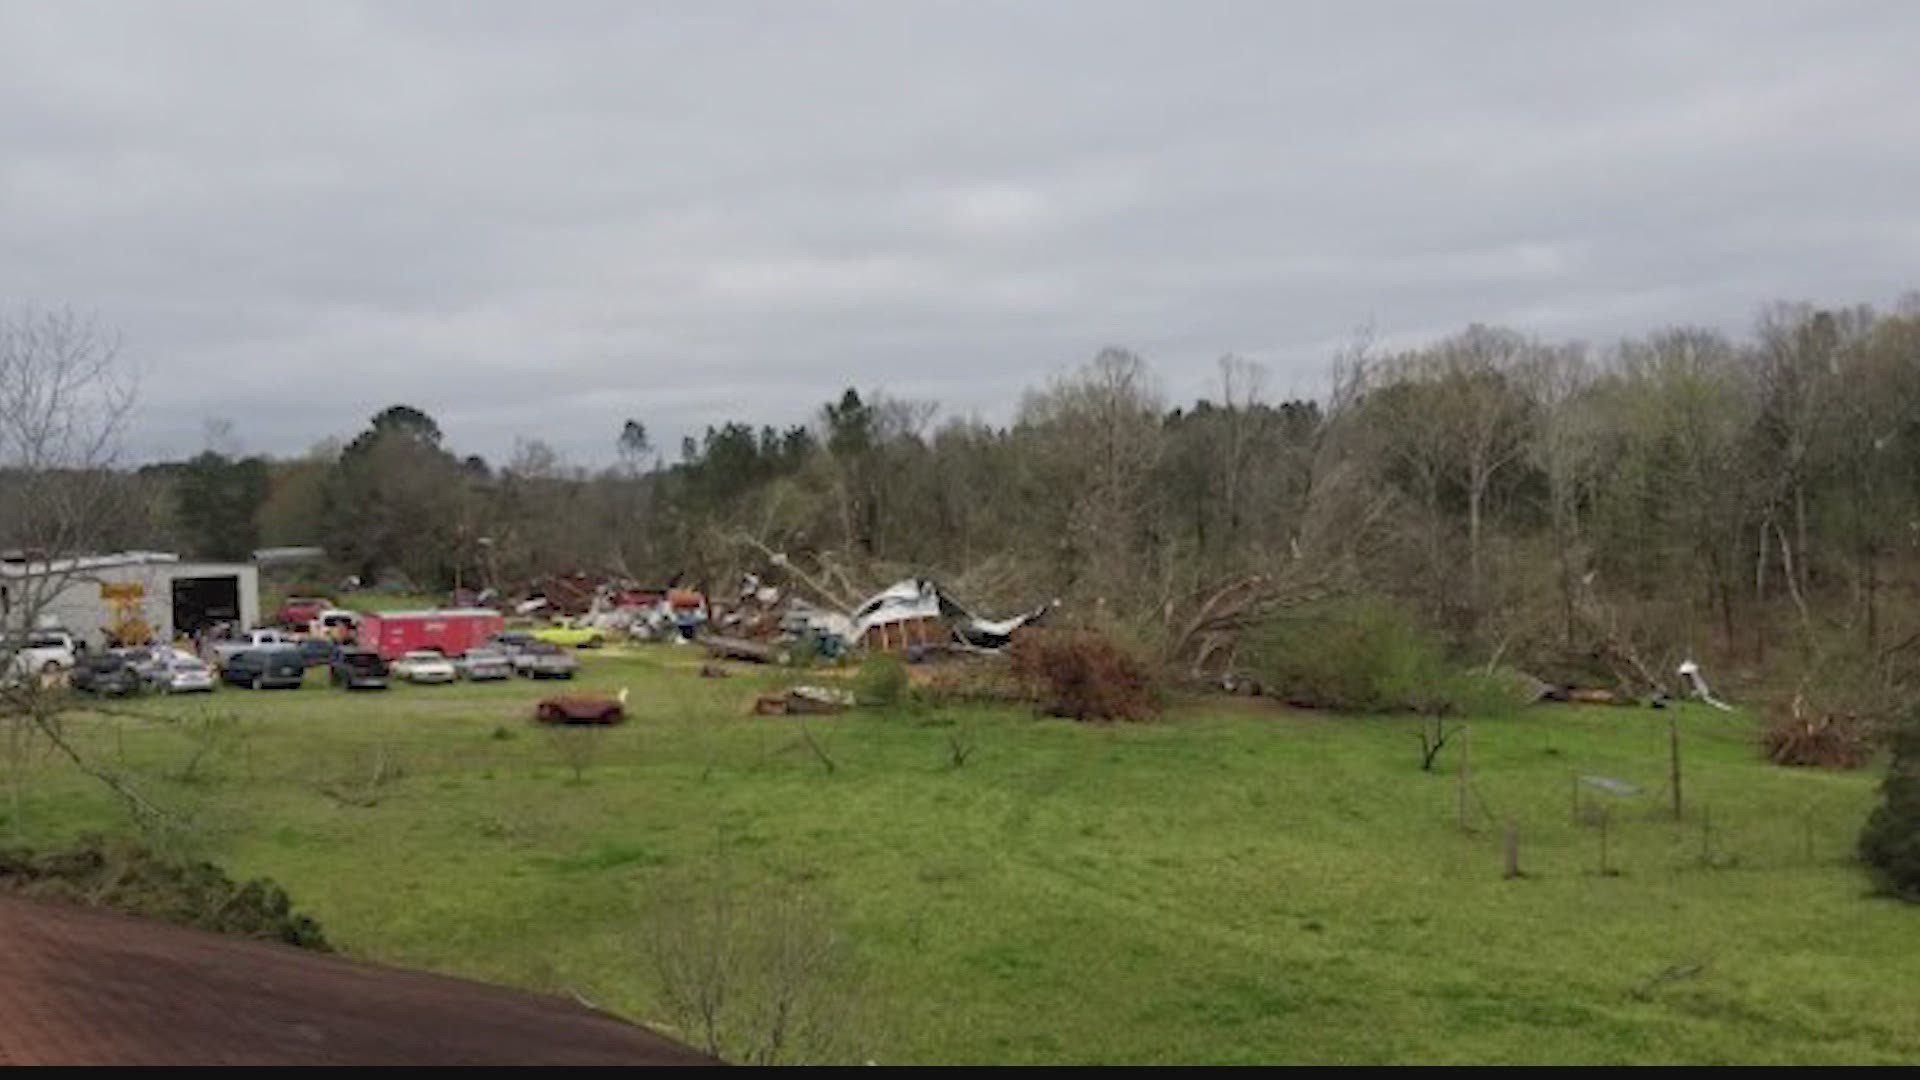 Some North Alabama churches gathered supplies and manpower and went over to Tishomingo after the tornado. They say they couldn’t believe what they saw.